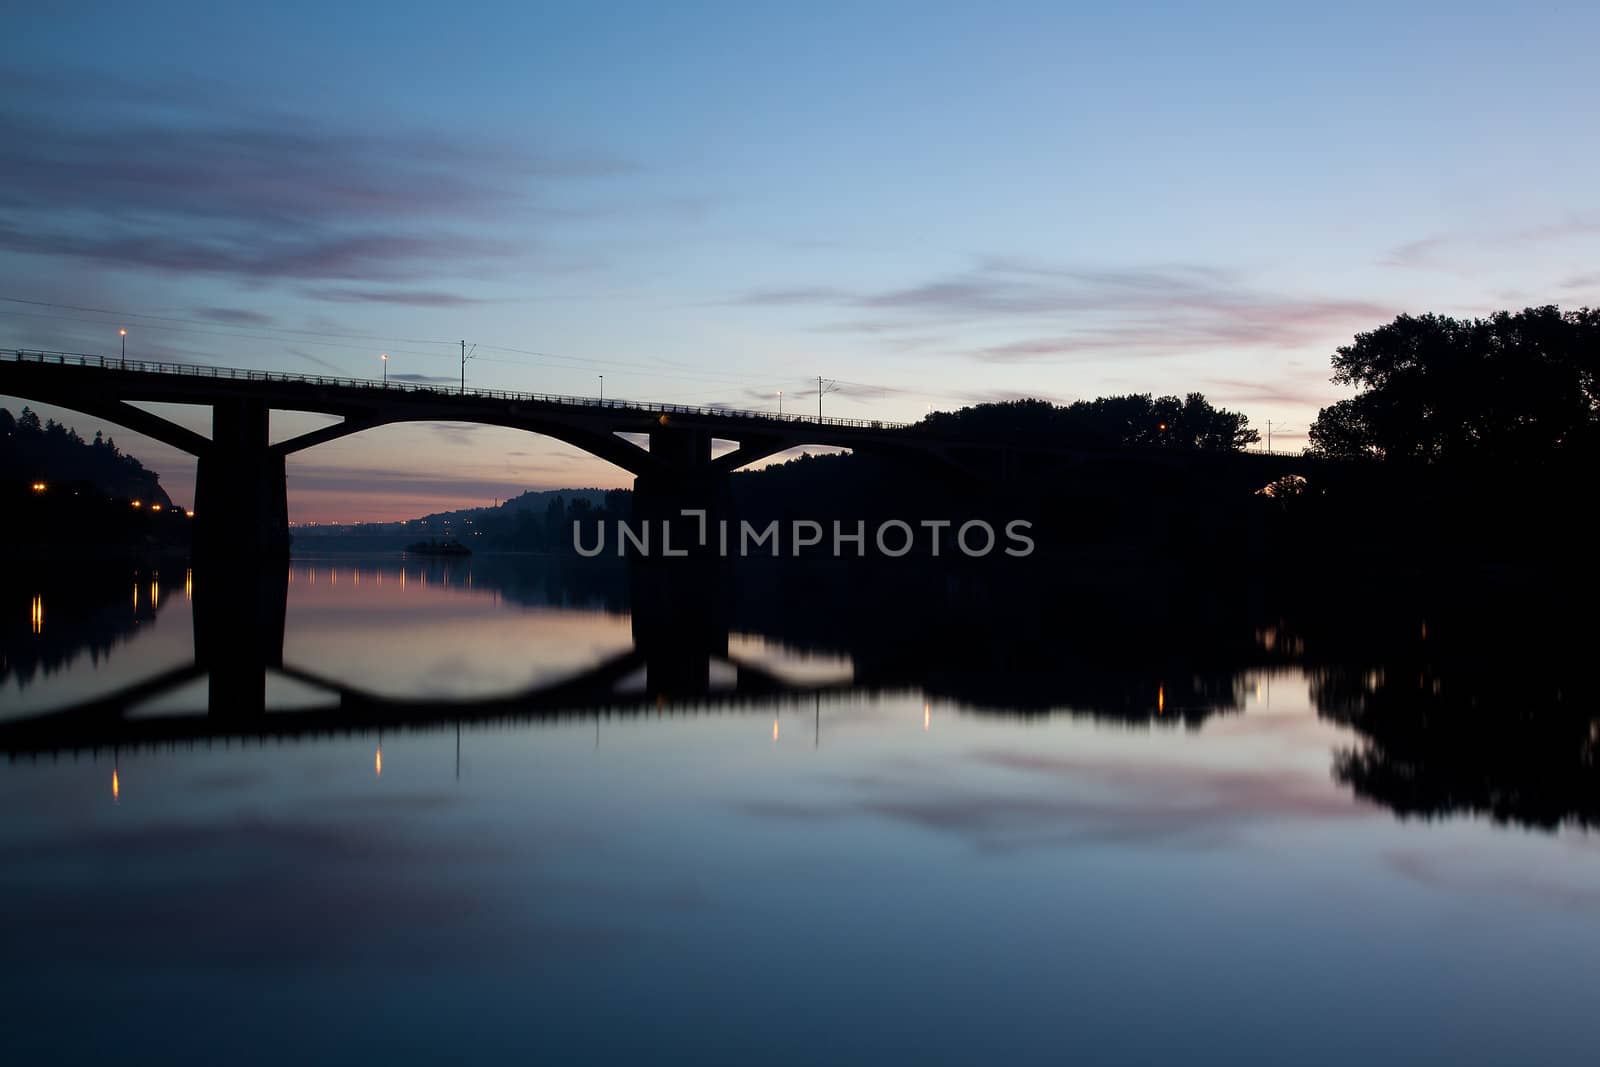 Railway bridge connecting river banks with reflection at sunrise